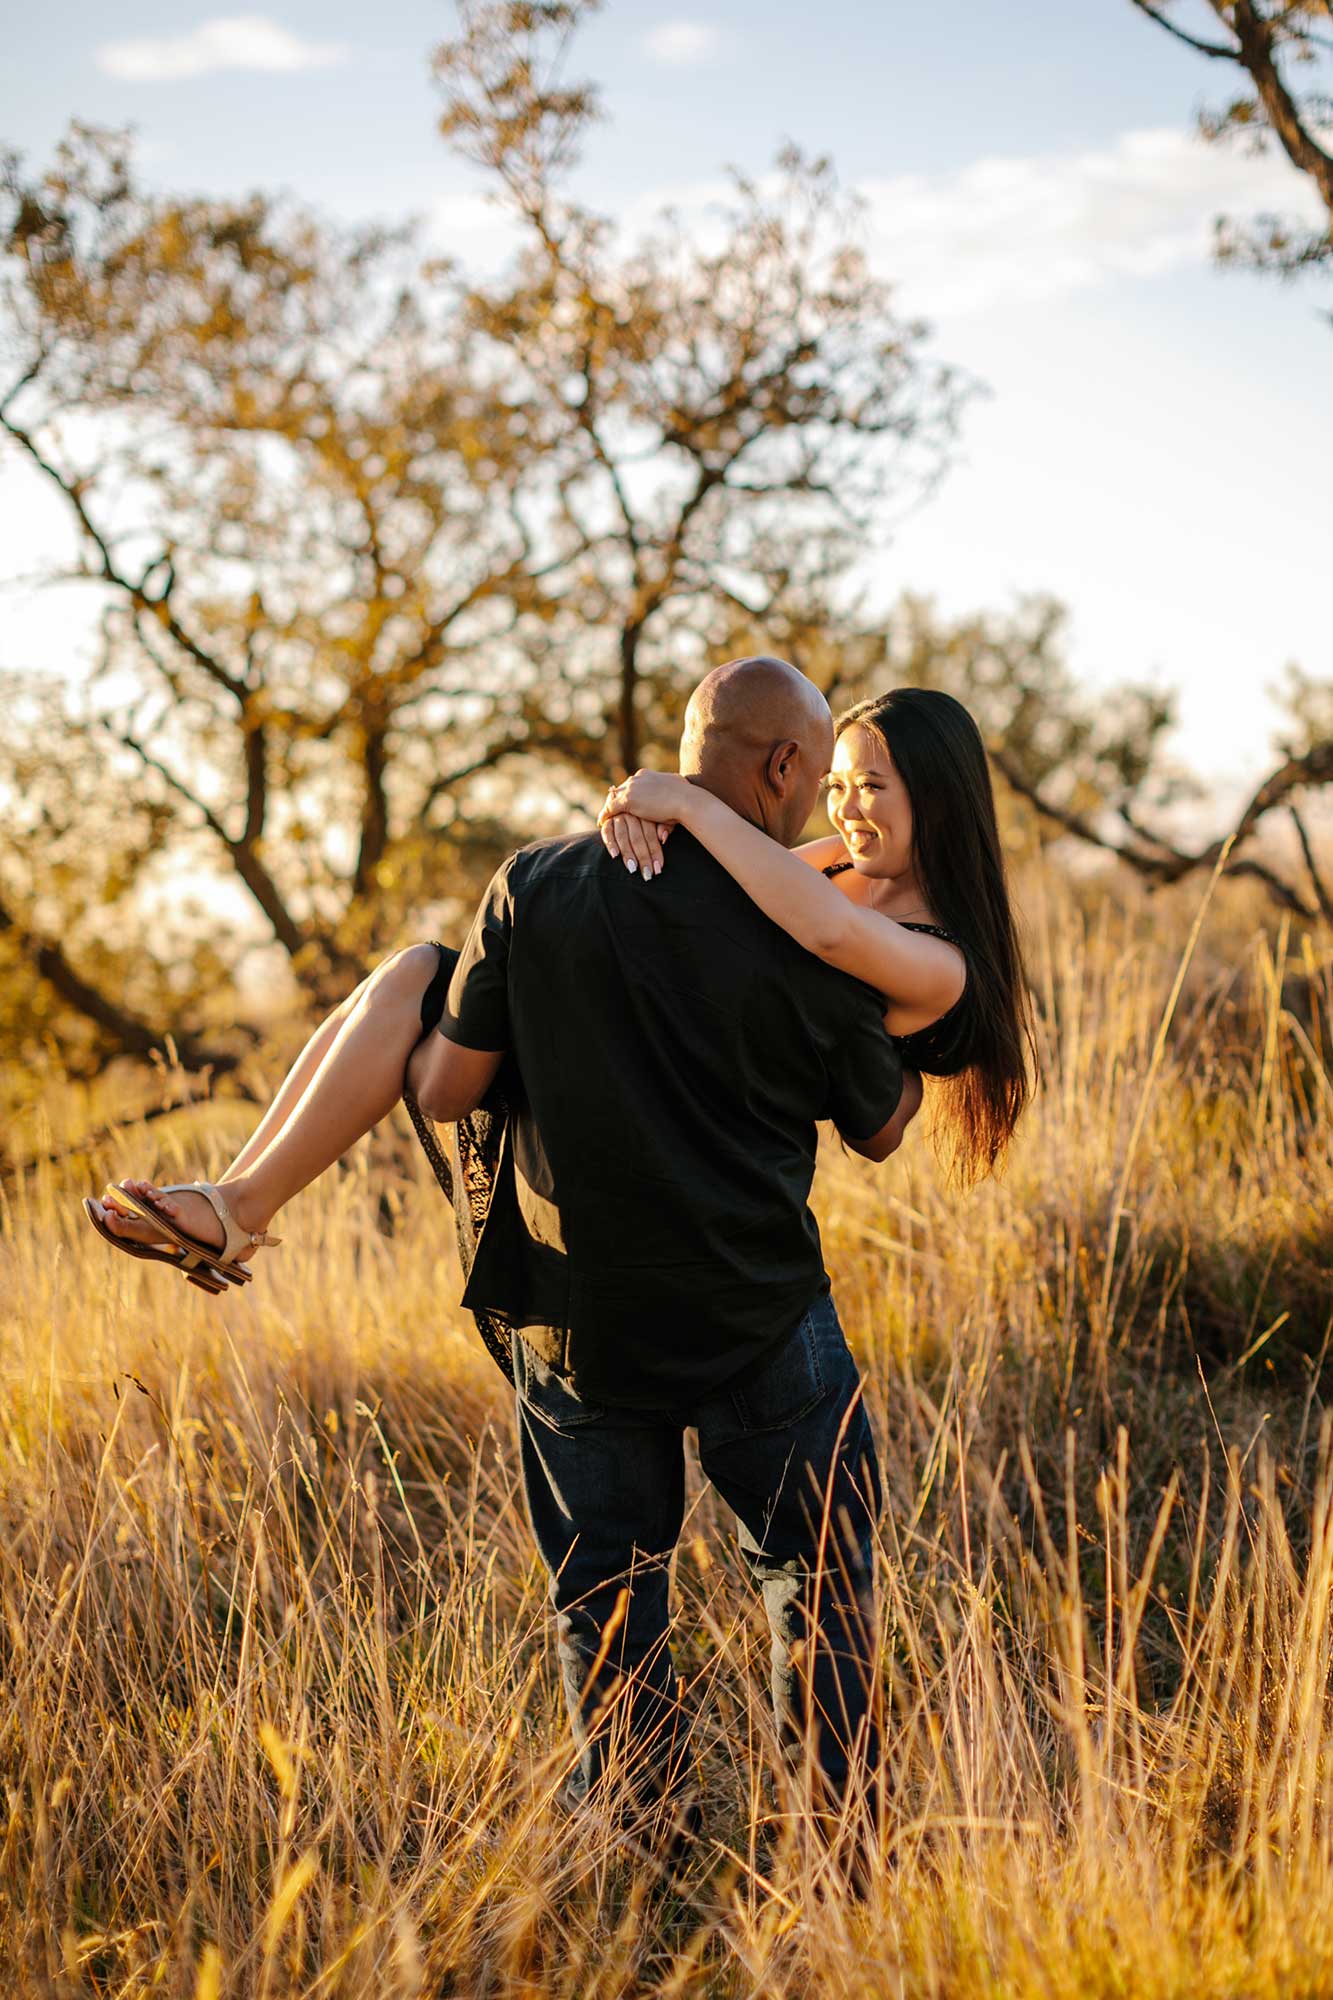 image of man carrying his girlfriend in the grass